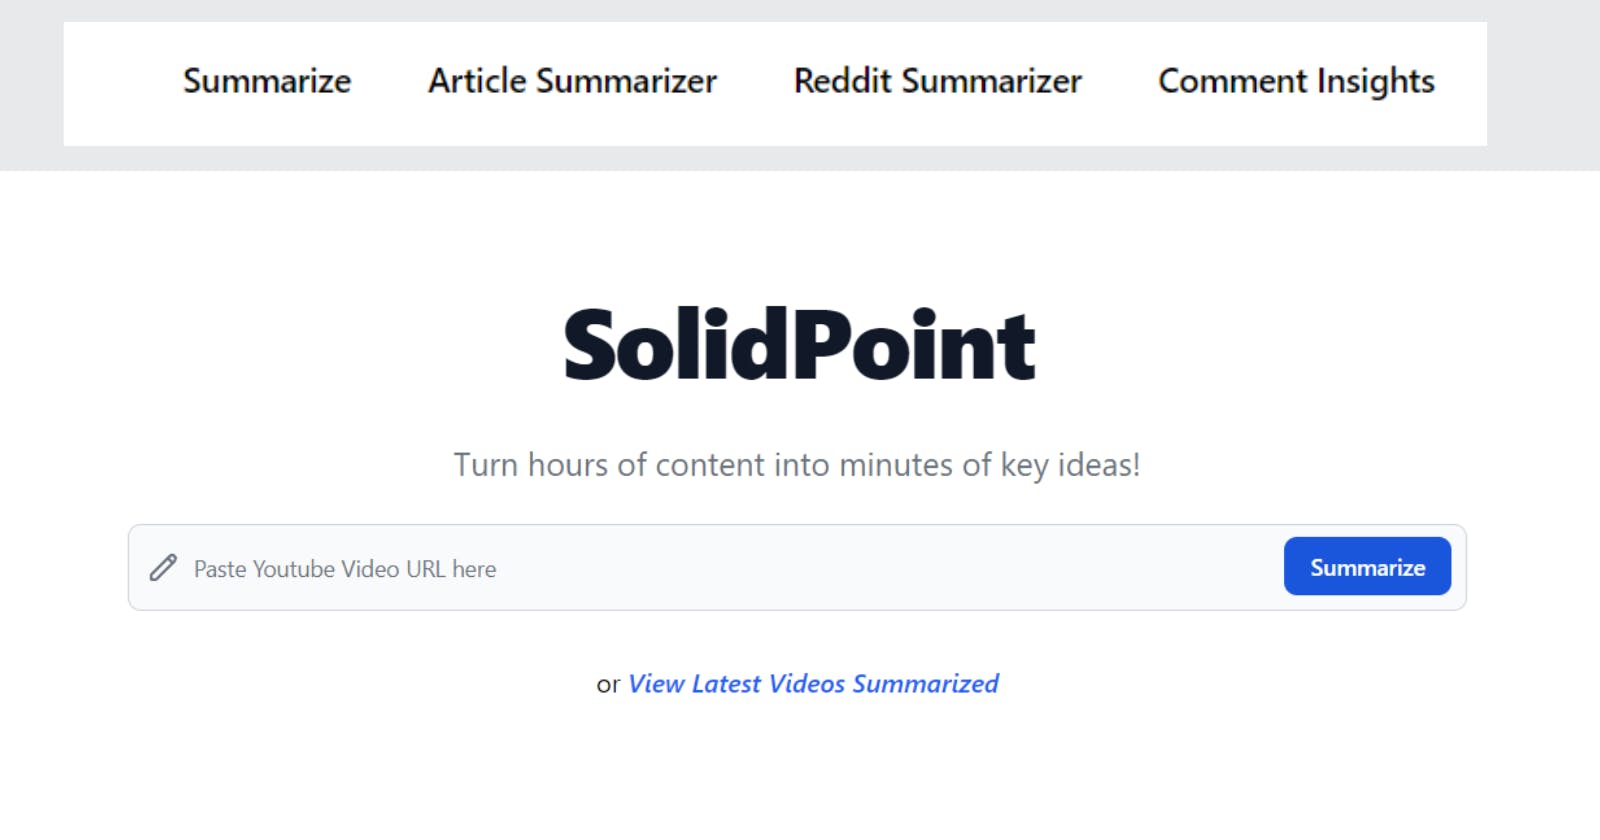 SolidPoint - Turn hours of content into minutes of key ideas